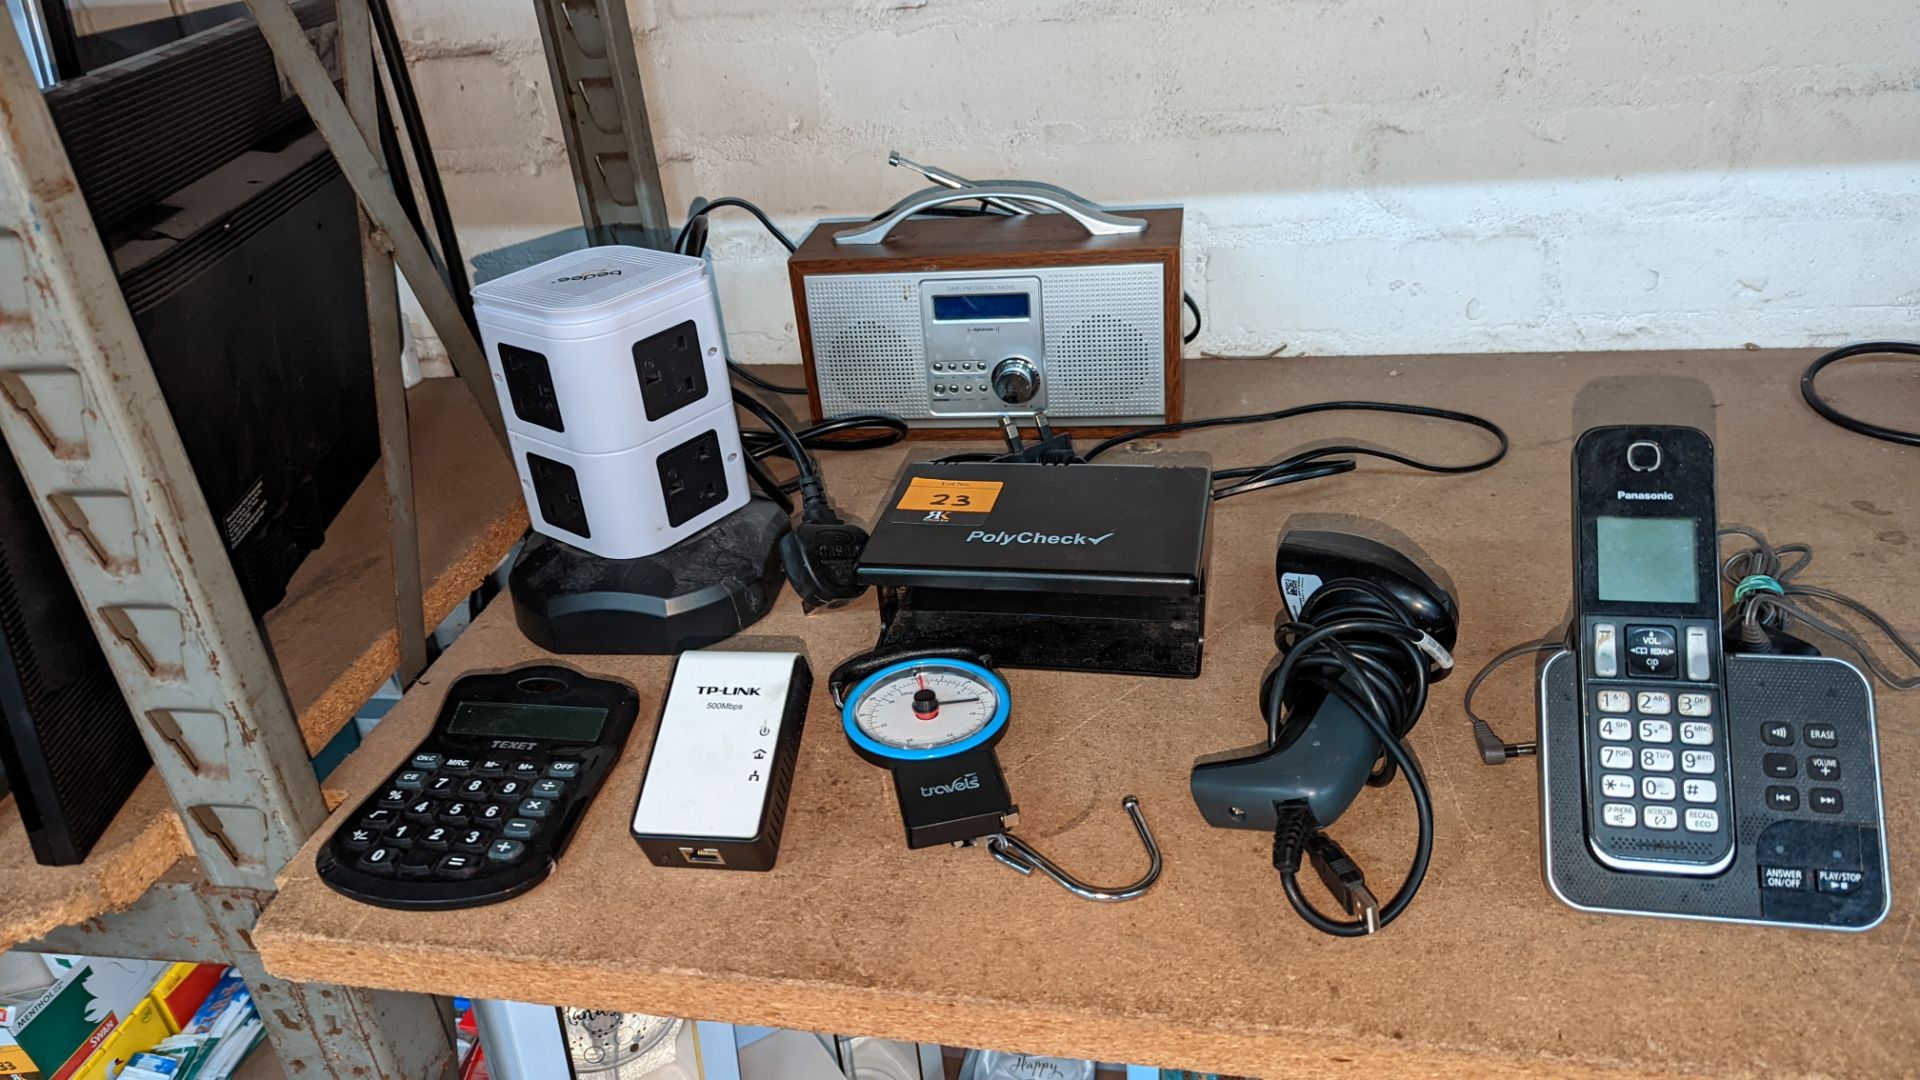 Mixed lot including hand-held barcode reader, Travels scales, Powerline adaptor, DAB radio, note det - Image 2 of 8